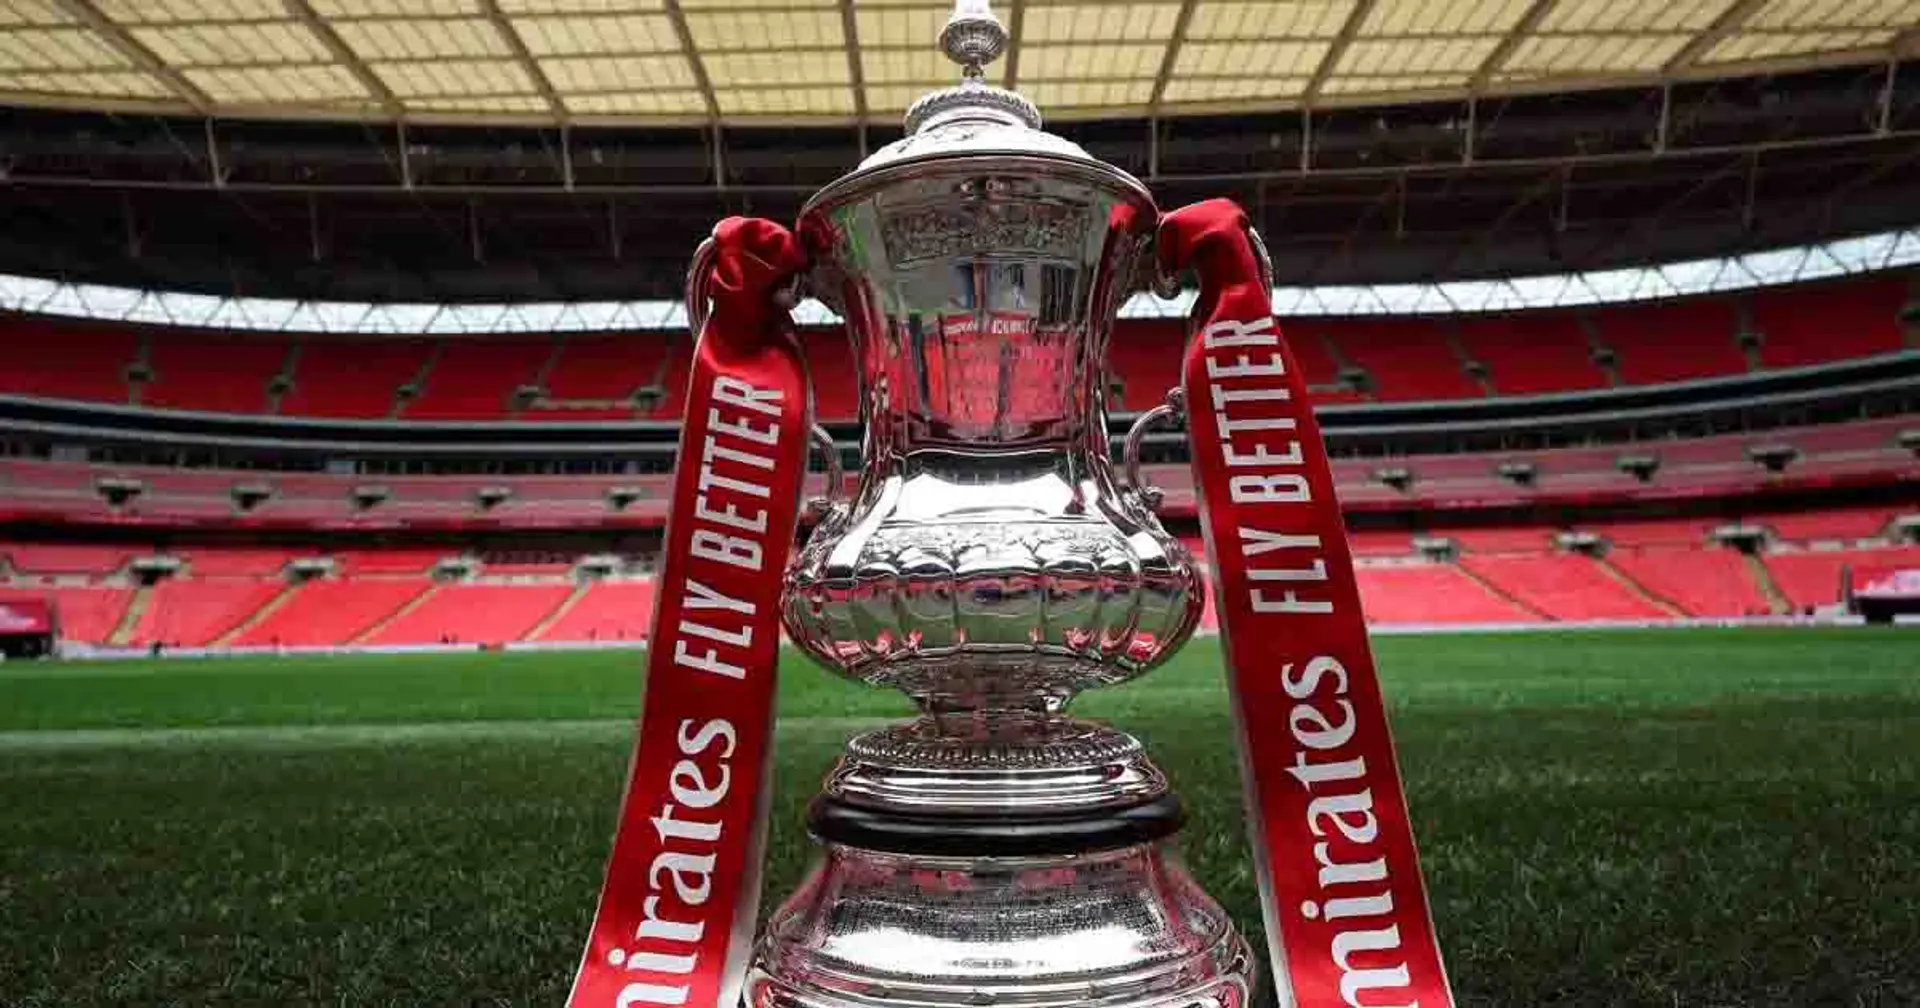 Man United to face Newport County/Eastleigh in FA Cup fourth round